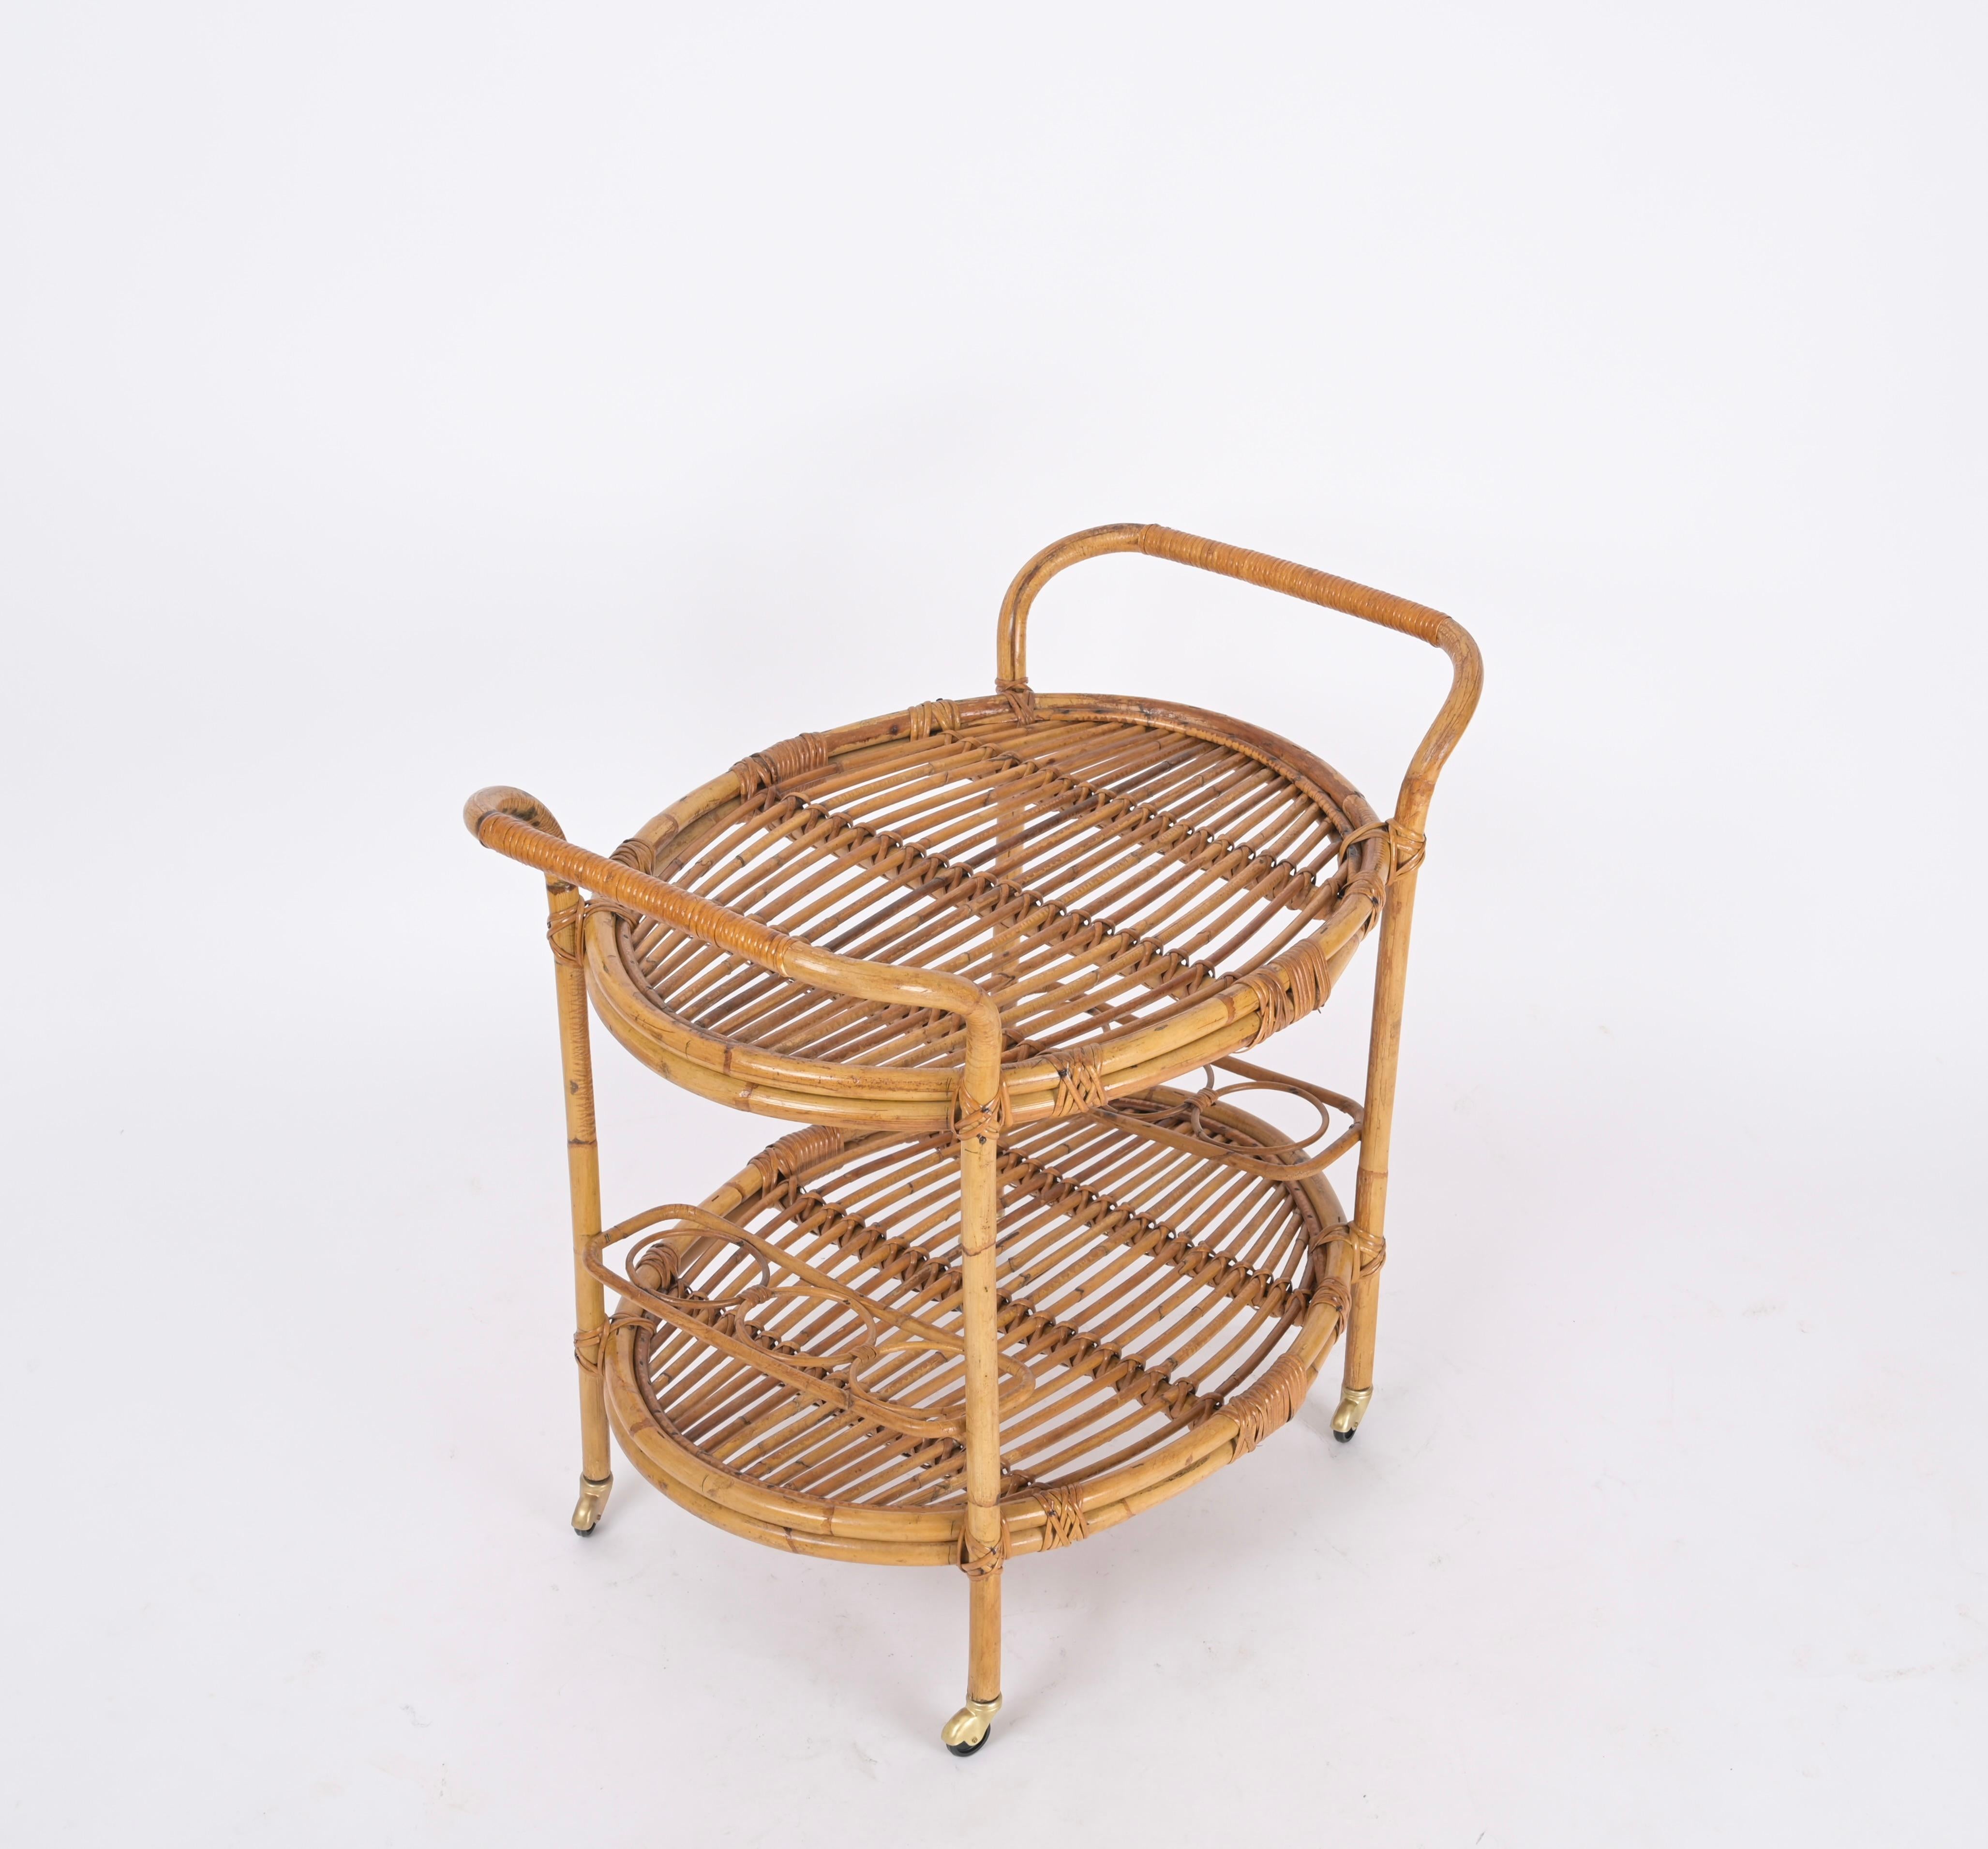 20th Century Mid-Century Italian Bamboo and Rattan Oval Serving Bar Cart Trolley, 1960s For Sale